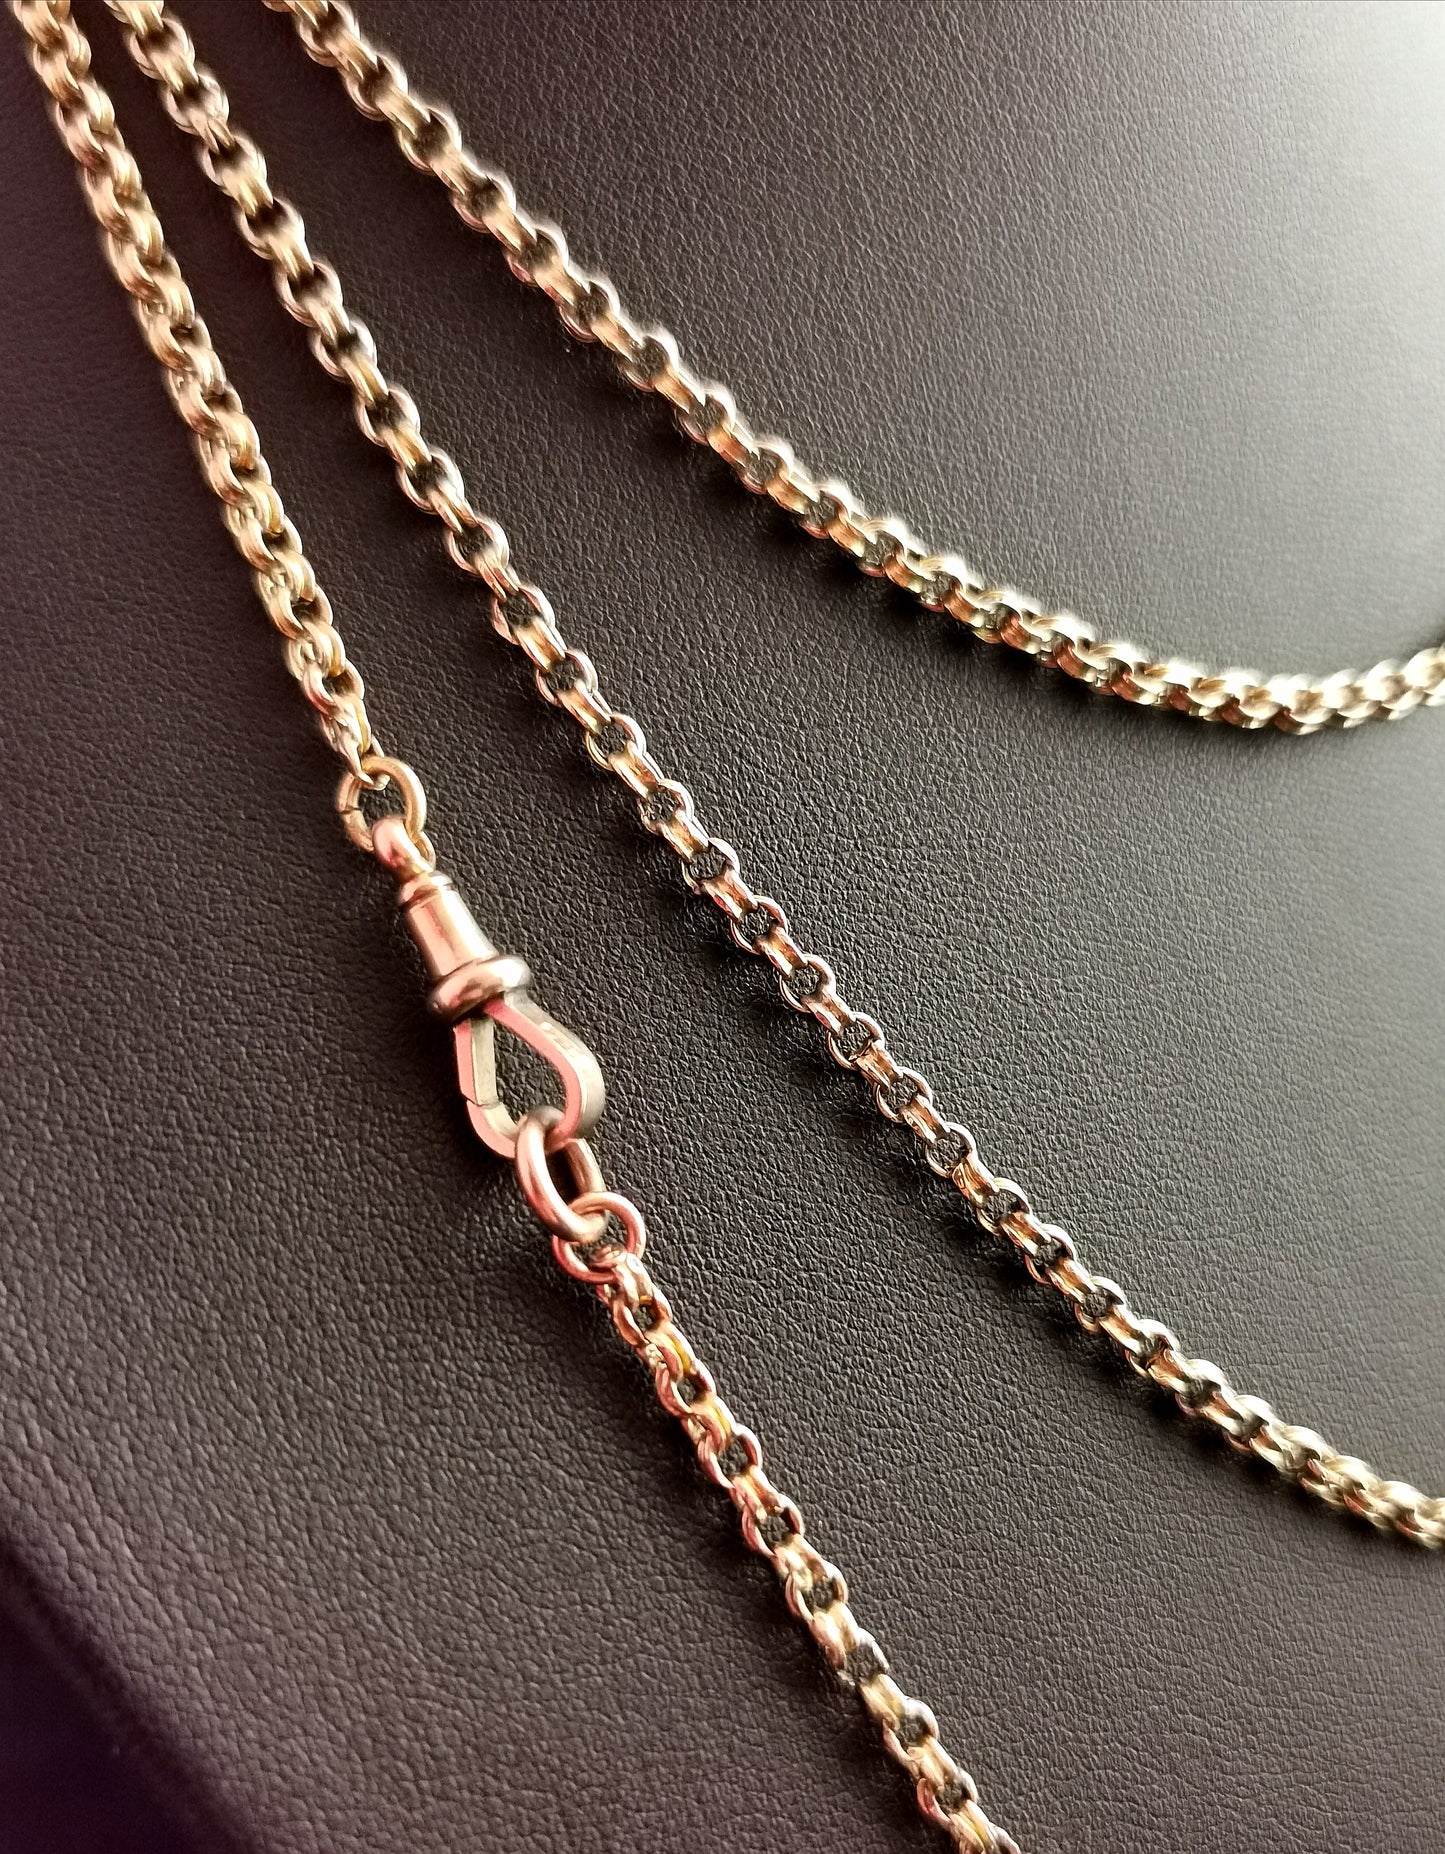 Antique 9ct gold longuard chain necklace, muff chain, rolo link